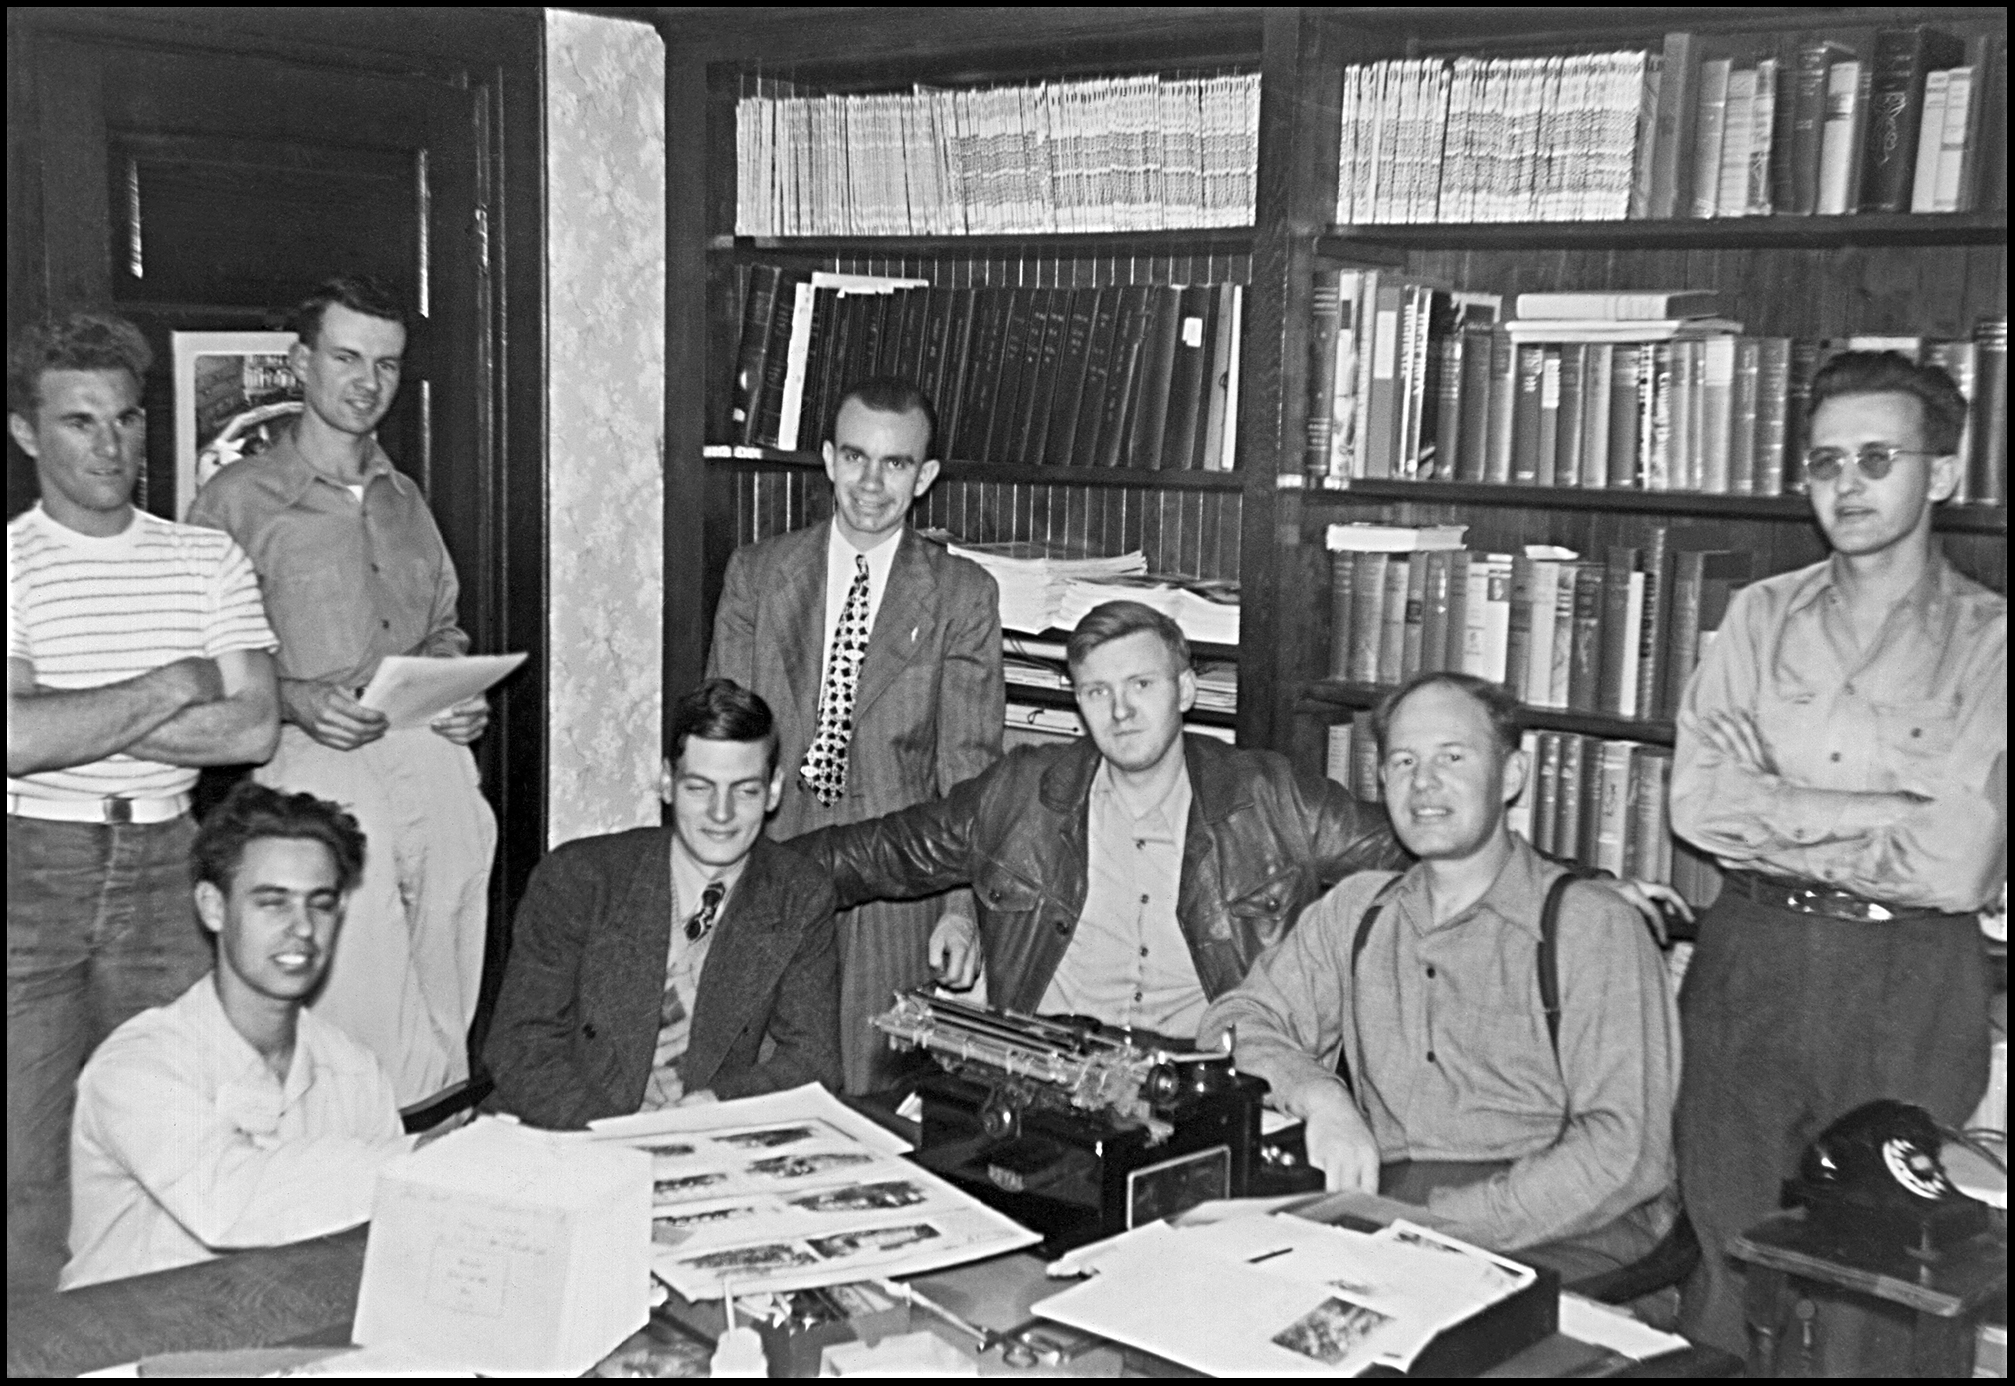 Seated at the typewriter is traction historian Ira L. Swett seen here with other traction fans at his home at 1416 S. Westmoreland Ave in Los Angeles, c.1950. Standing, second from the left is cartographer Raymond E. Younghans, the creator of many of the map published in Ira’s Interurban Specials.